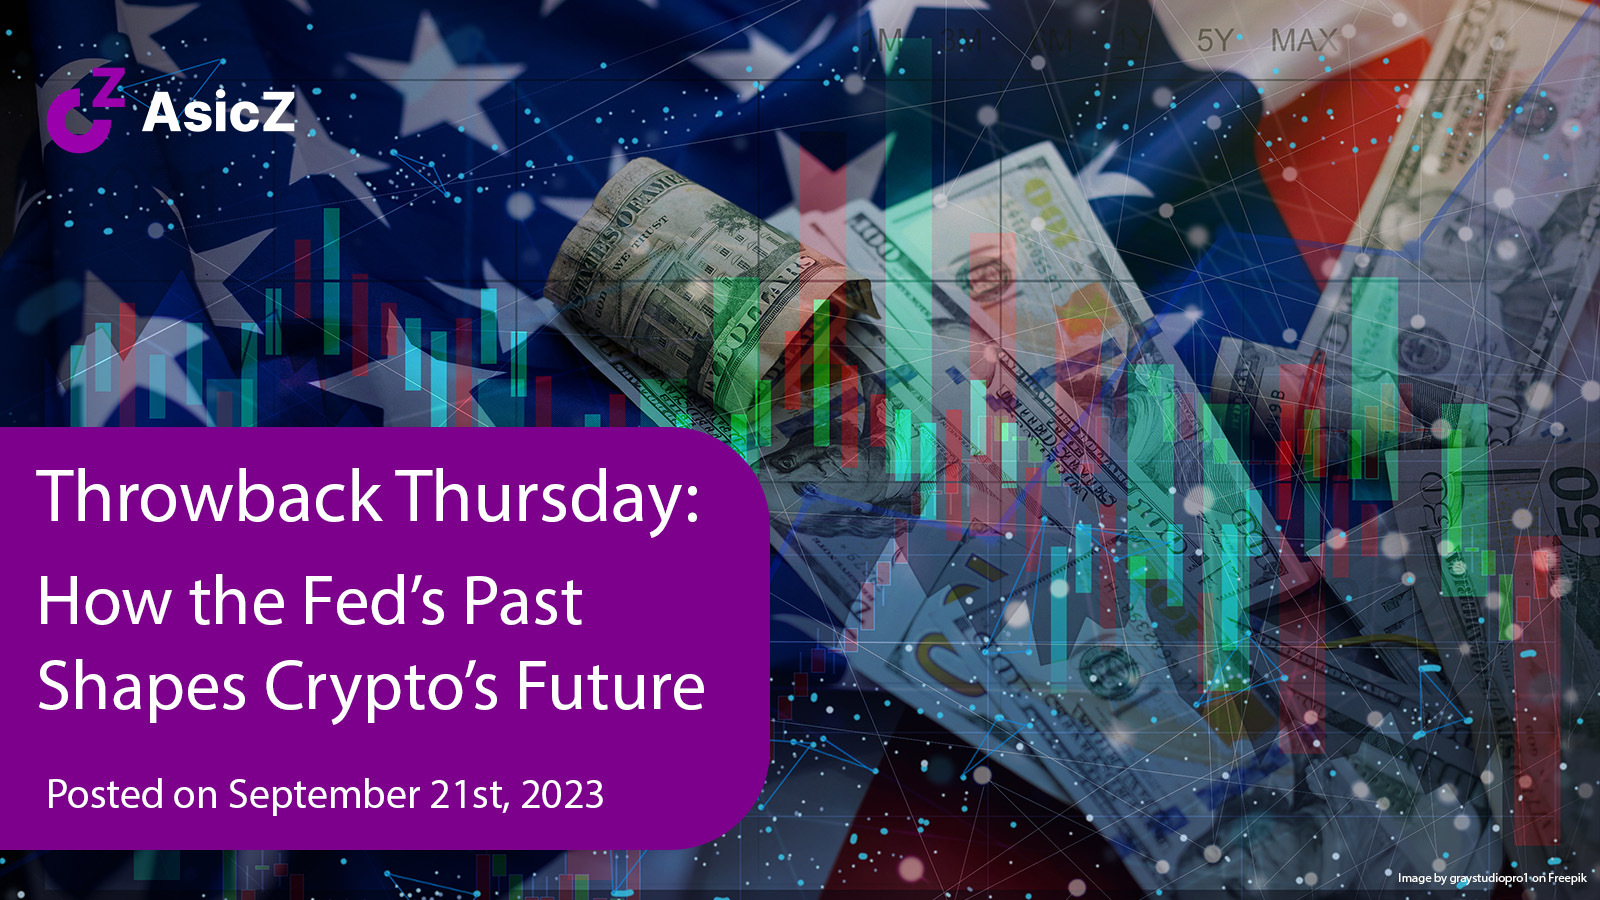 Throwback Thursday: How the Fed’s Past Shapes Crypto’s Future